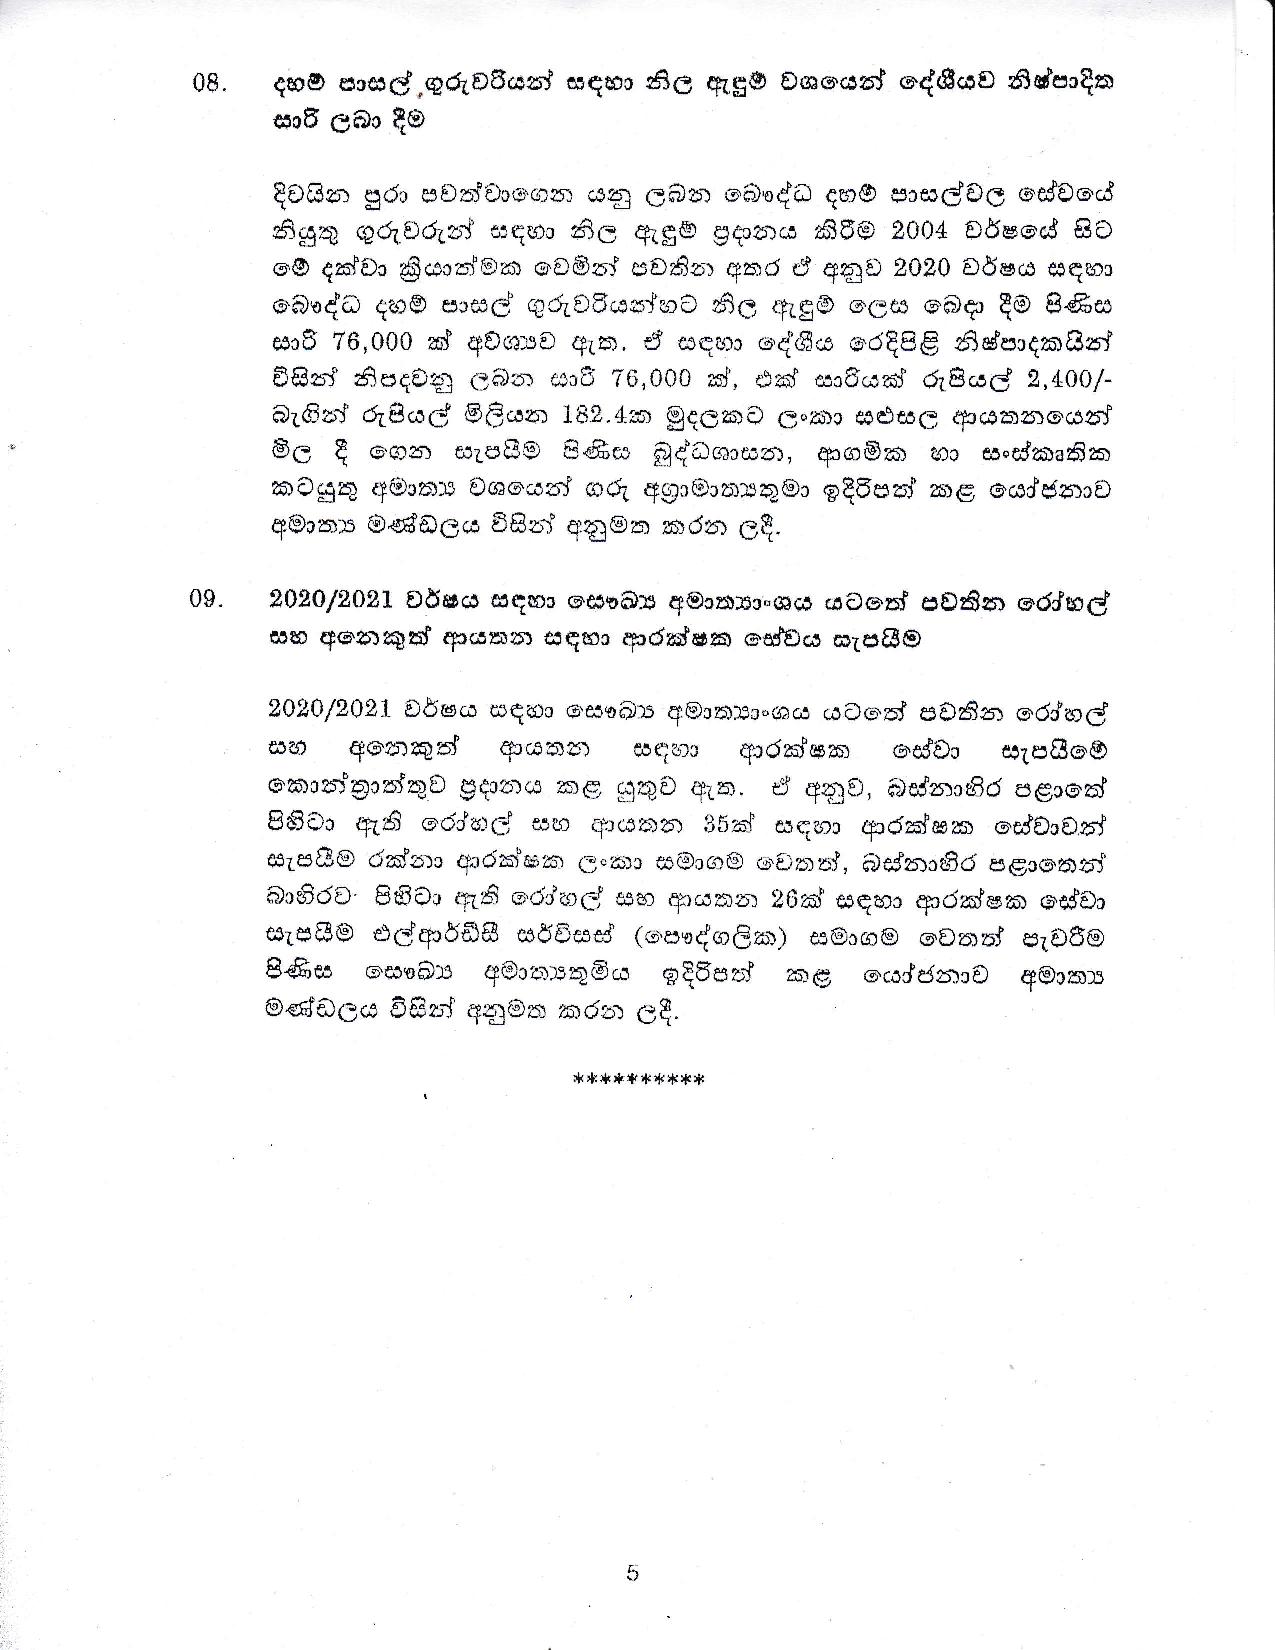 Cabinet Decision on 02.11.2020 page 005